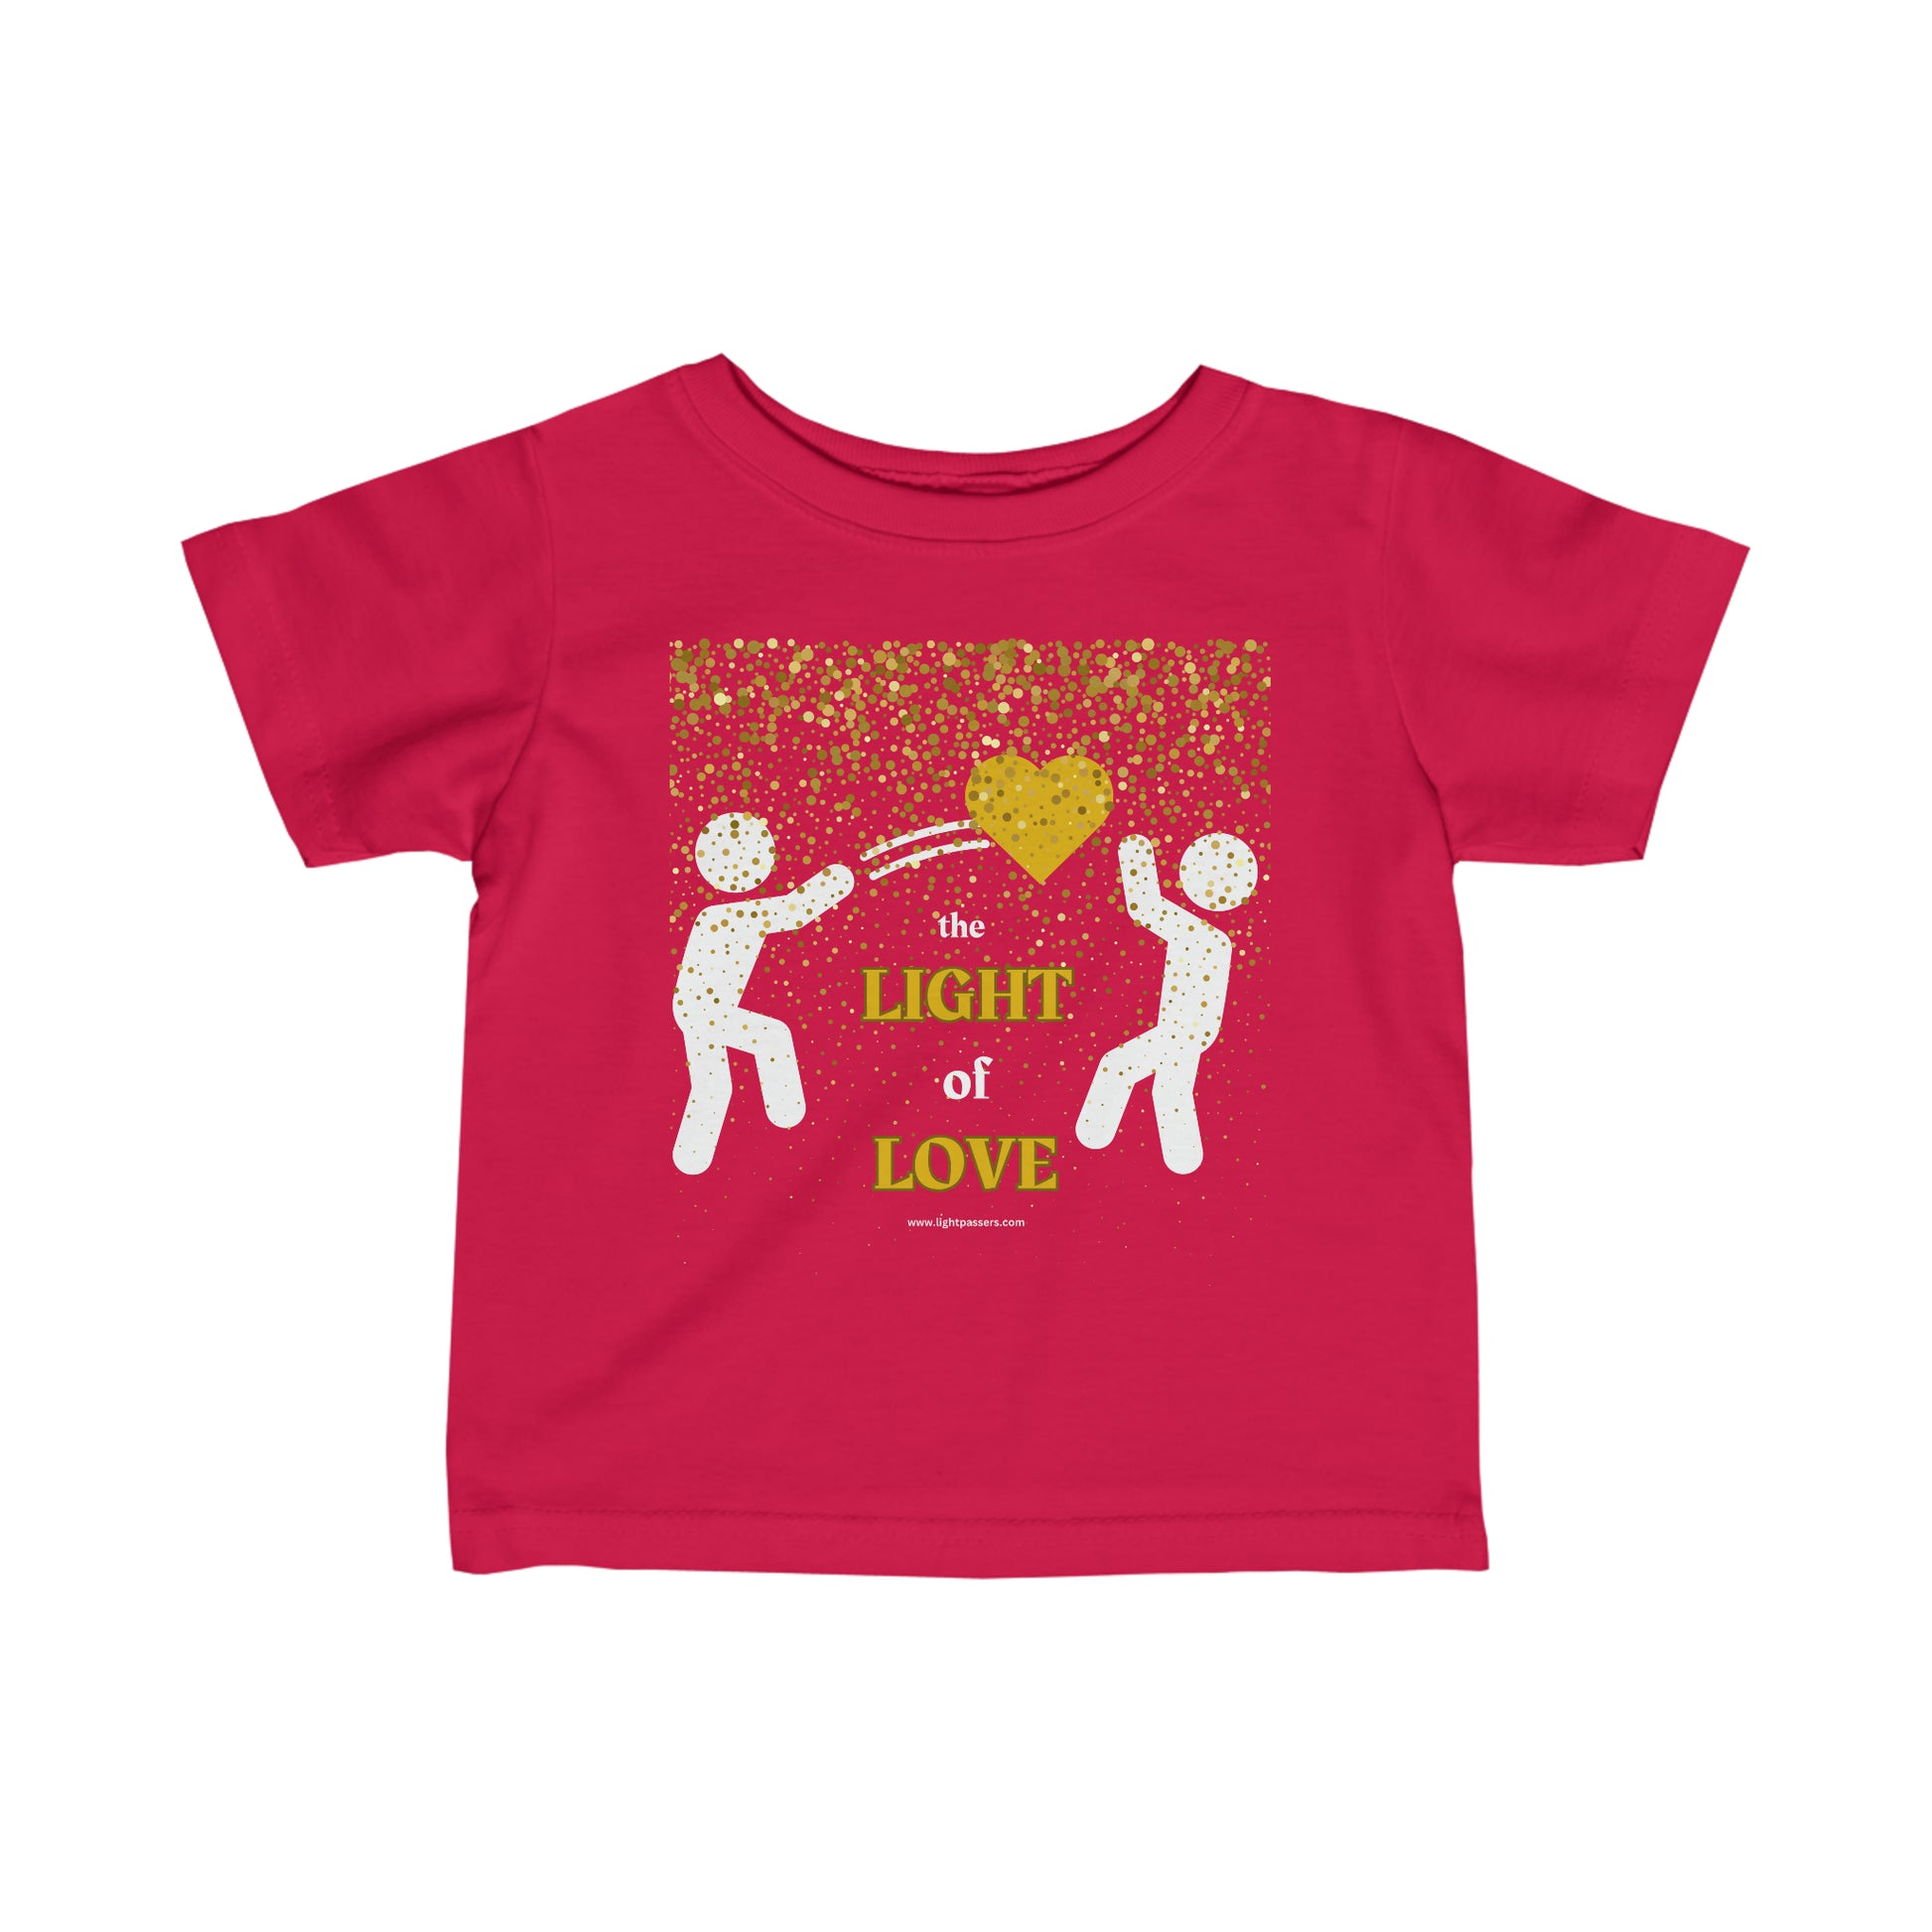 Infant fine jersey tee with a red shirt featuring a gold heart, white figures, and dots. Side seams, ribbed knitting, and taped shoulders for comfort and durability.